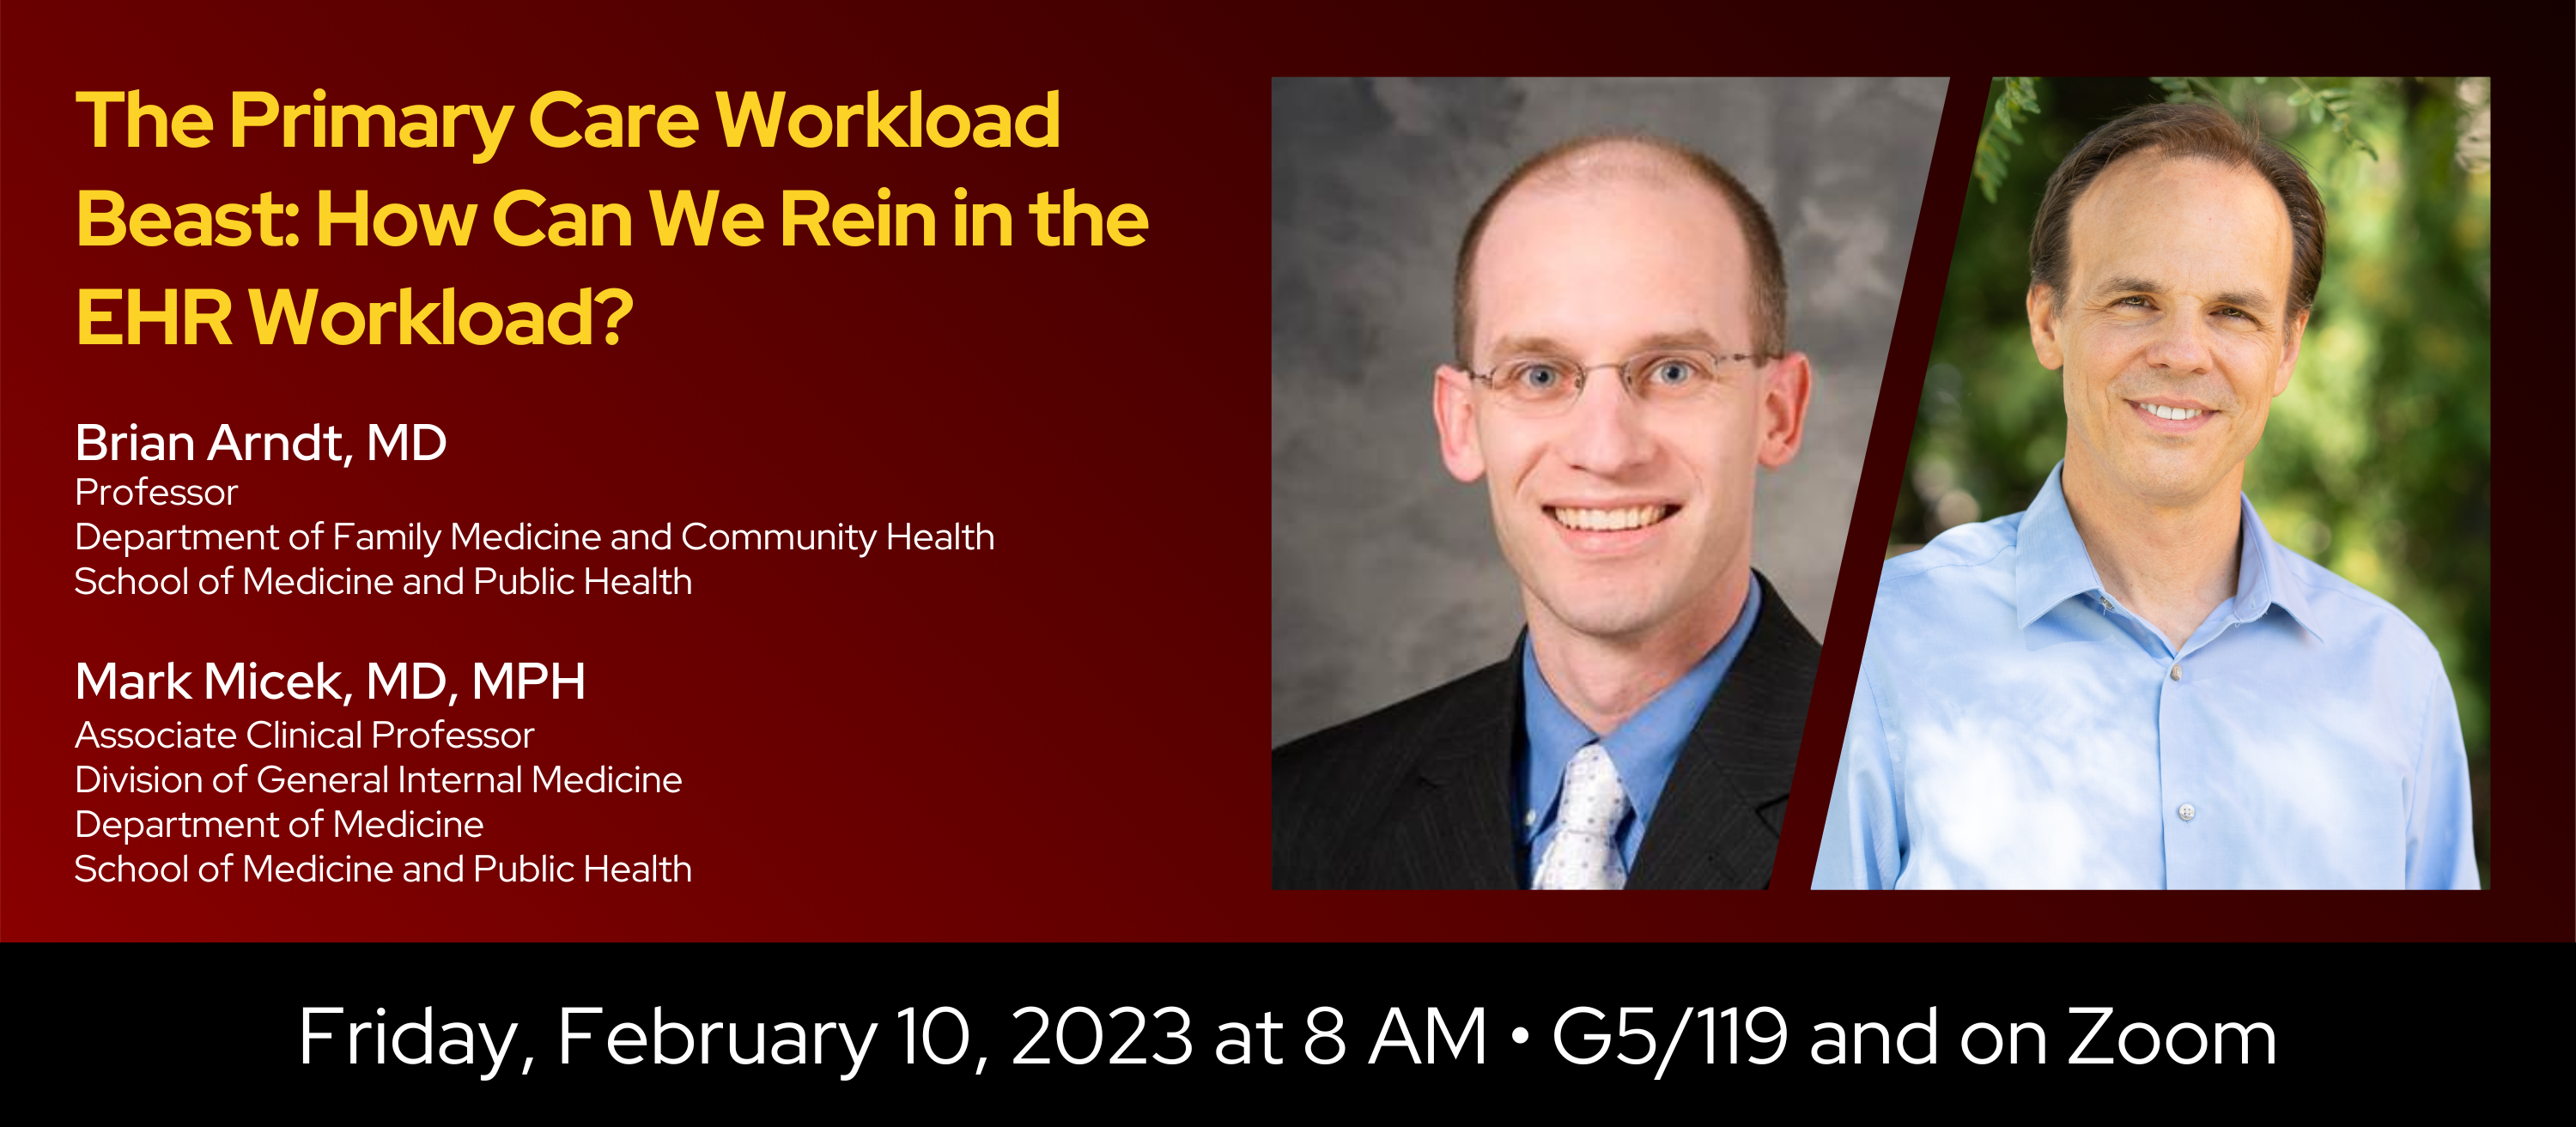 The Primary Care Workload Beast: How Can We Rein in the EHR Workload?